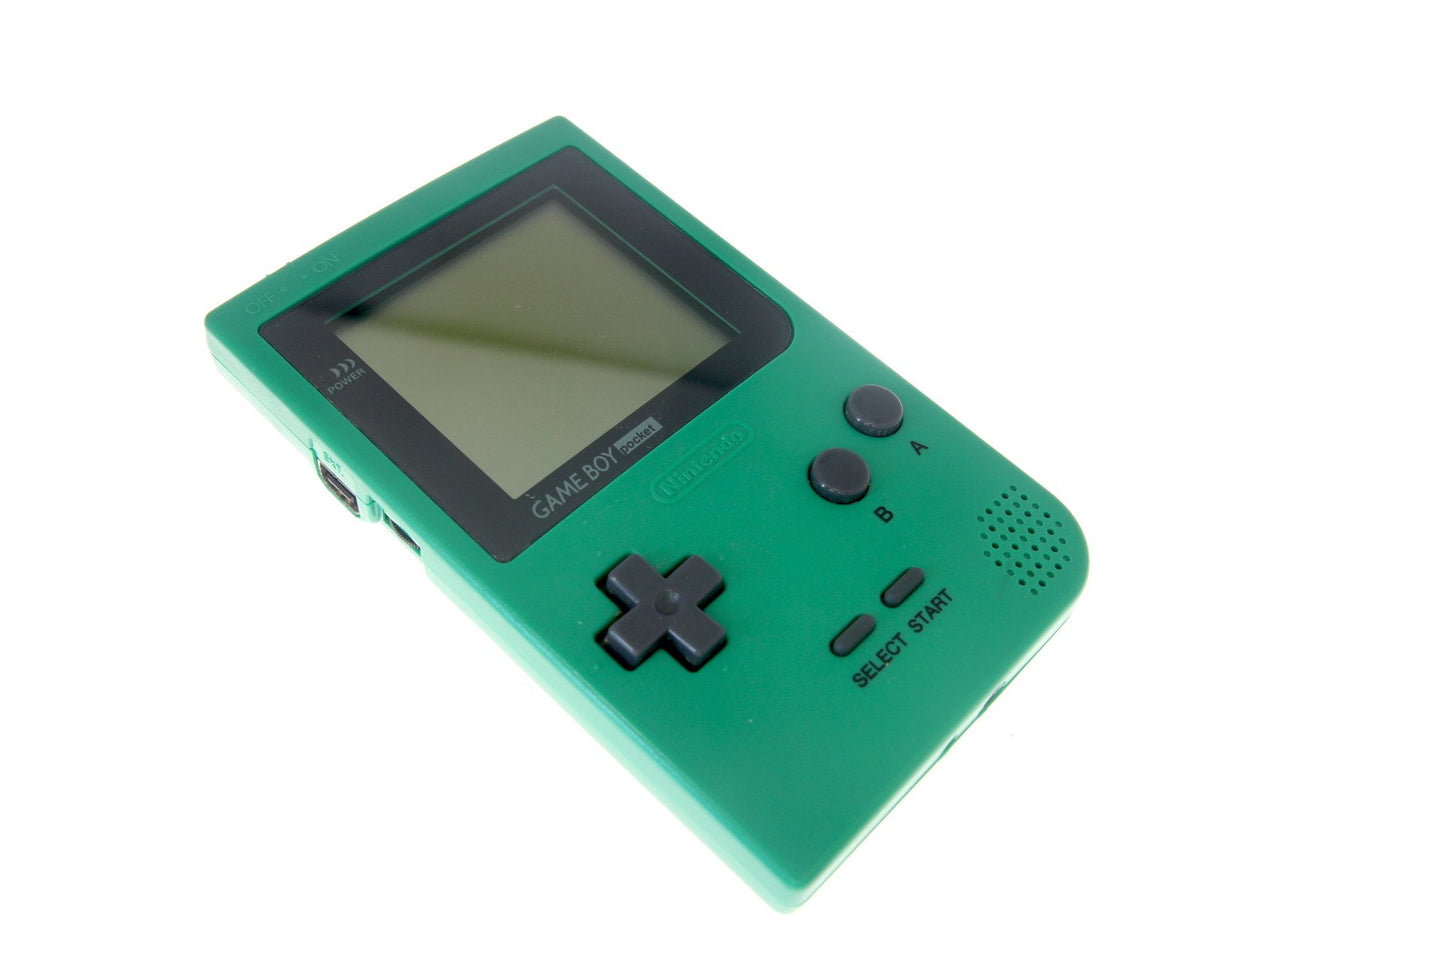 Nintendo Gameboy Pocket Handheld Gaming Console - Green - with Battery Cover